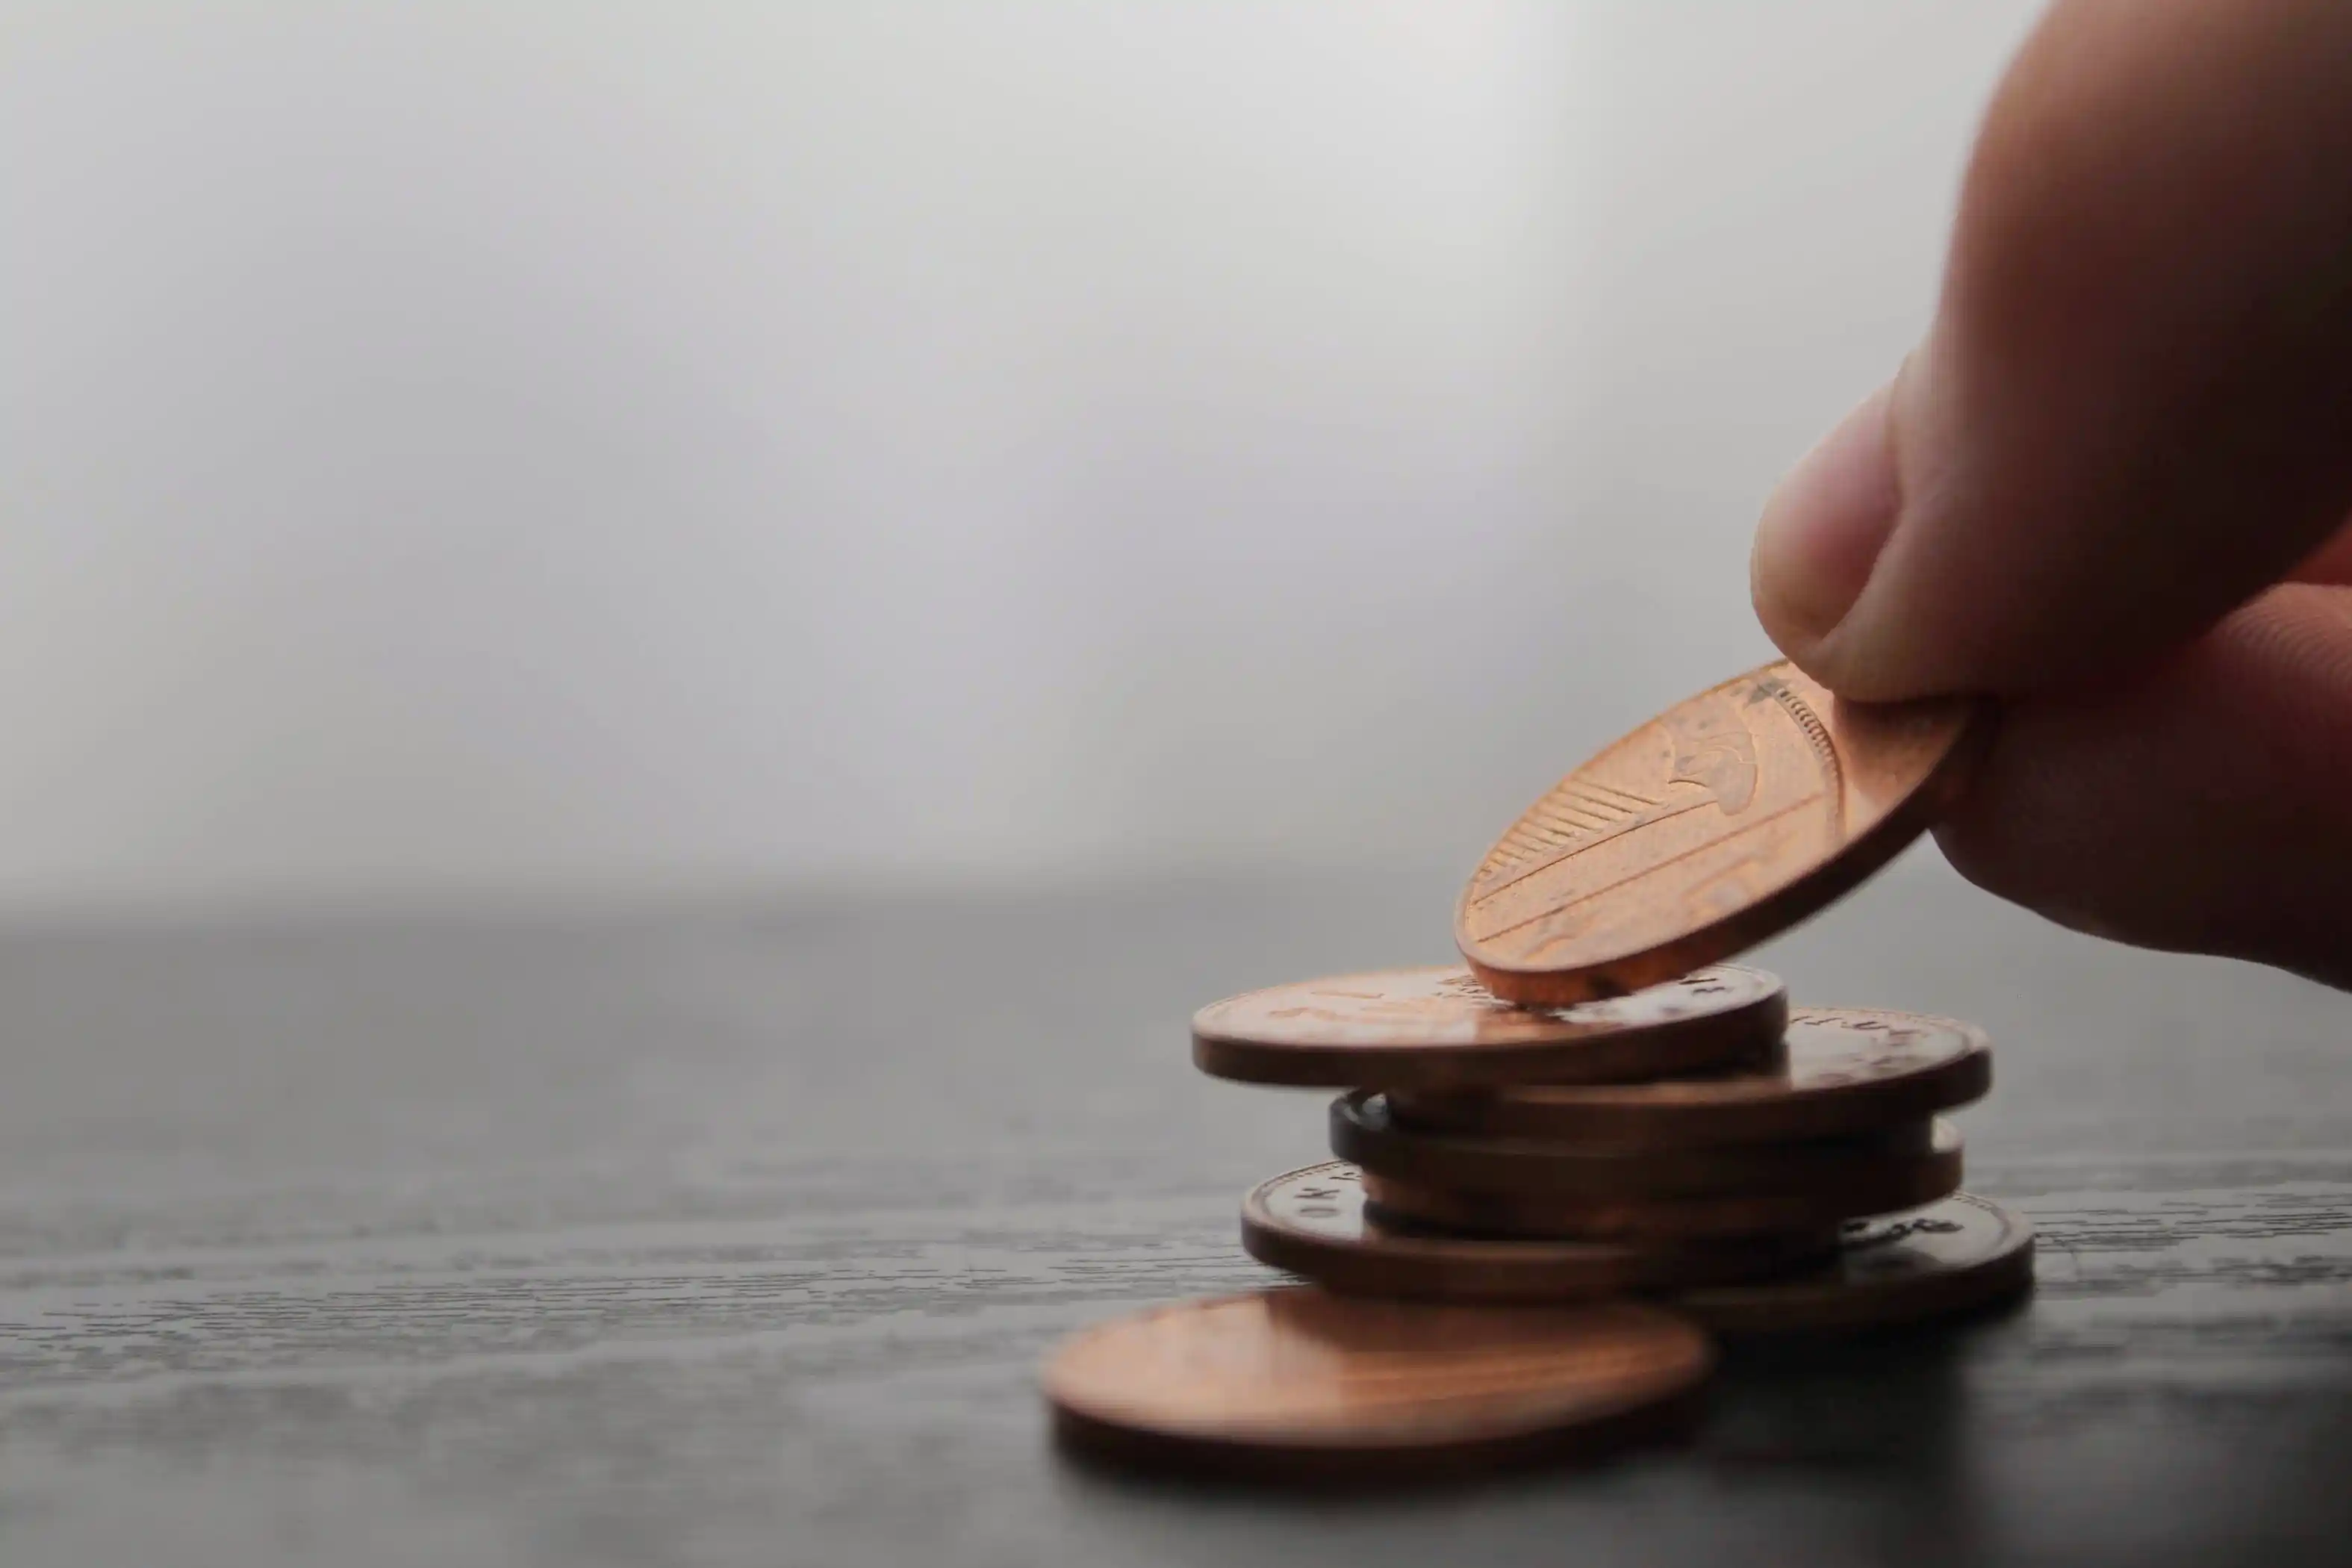 Is Pinching Pennies The Ultimate Secret To Wealth?